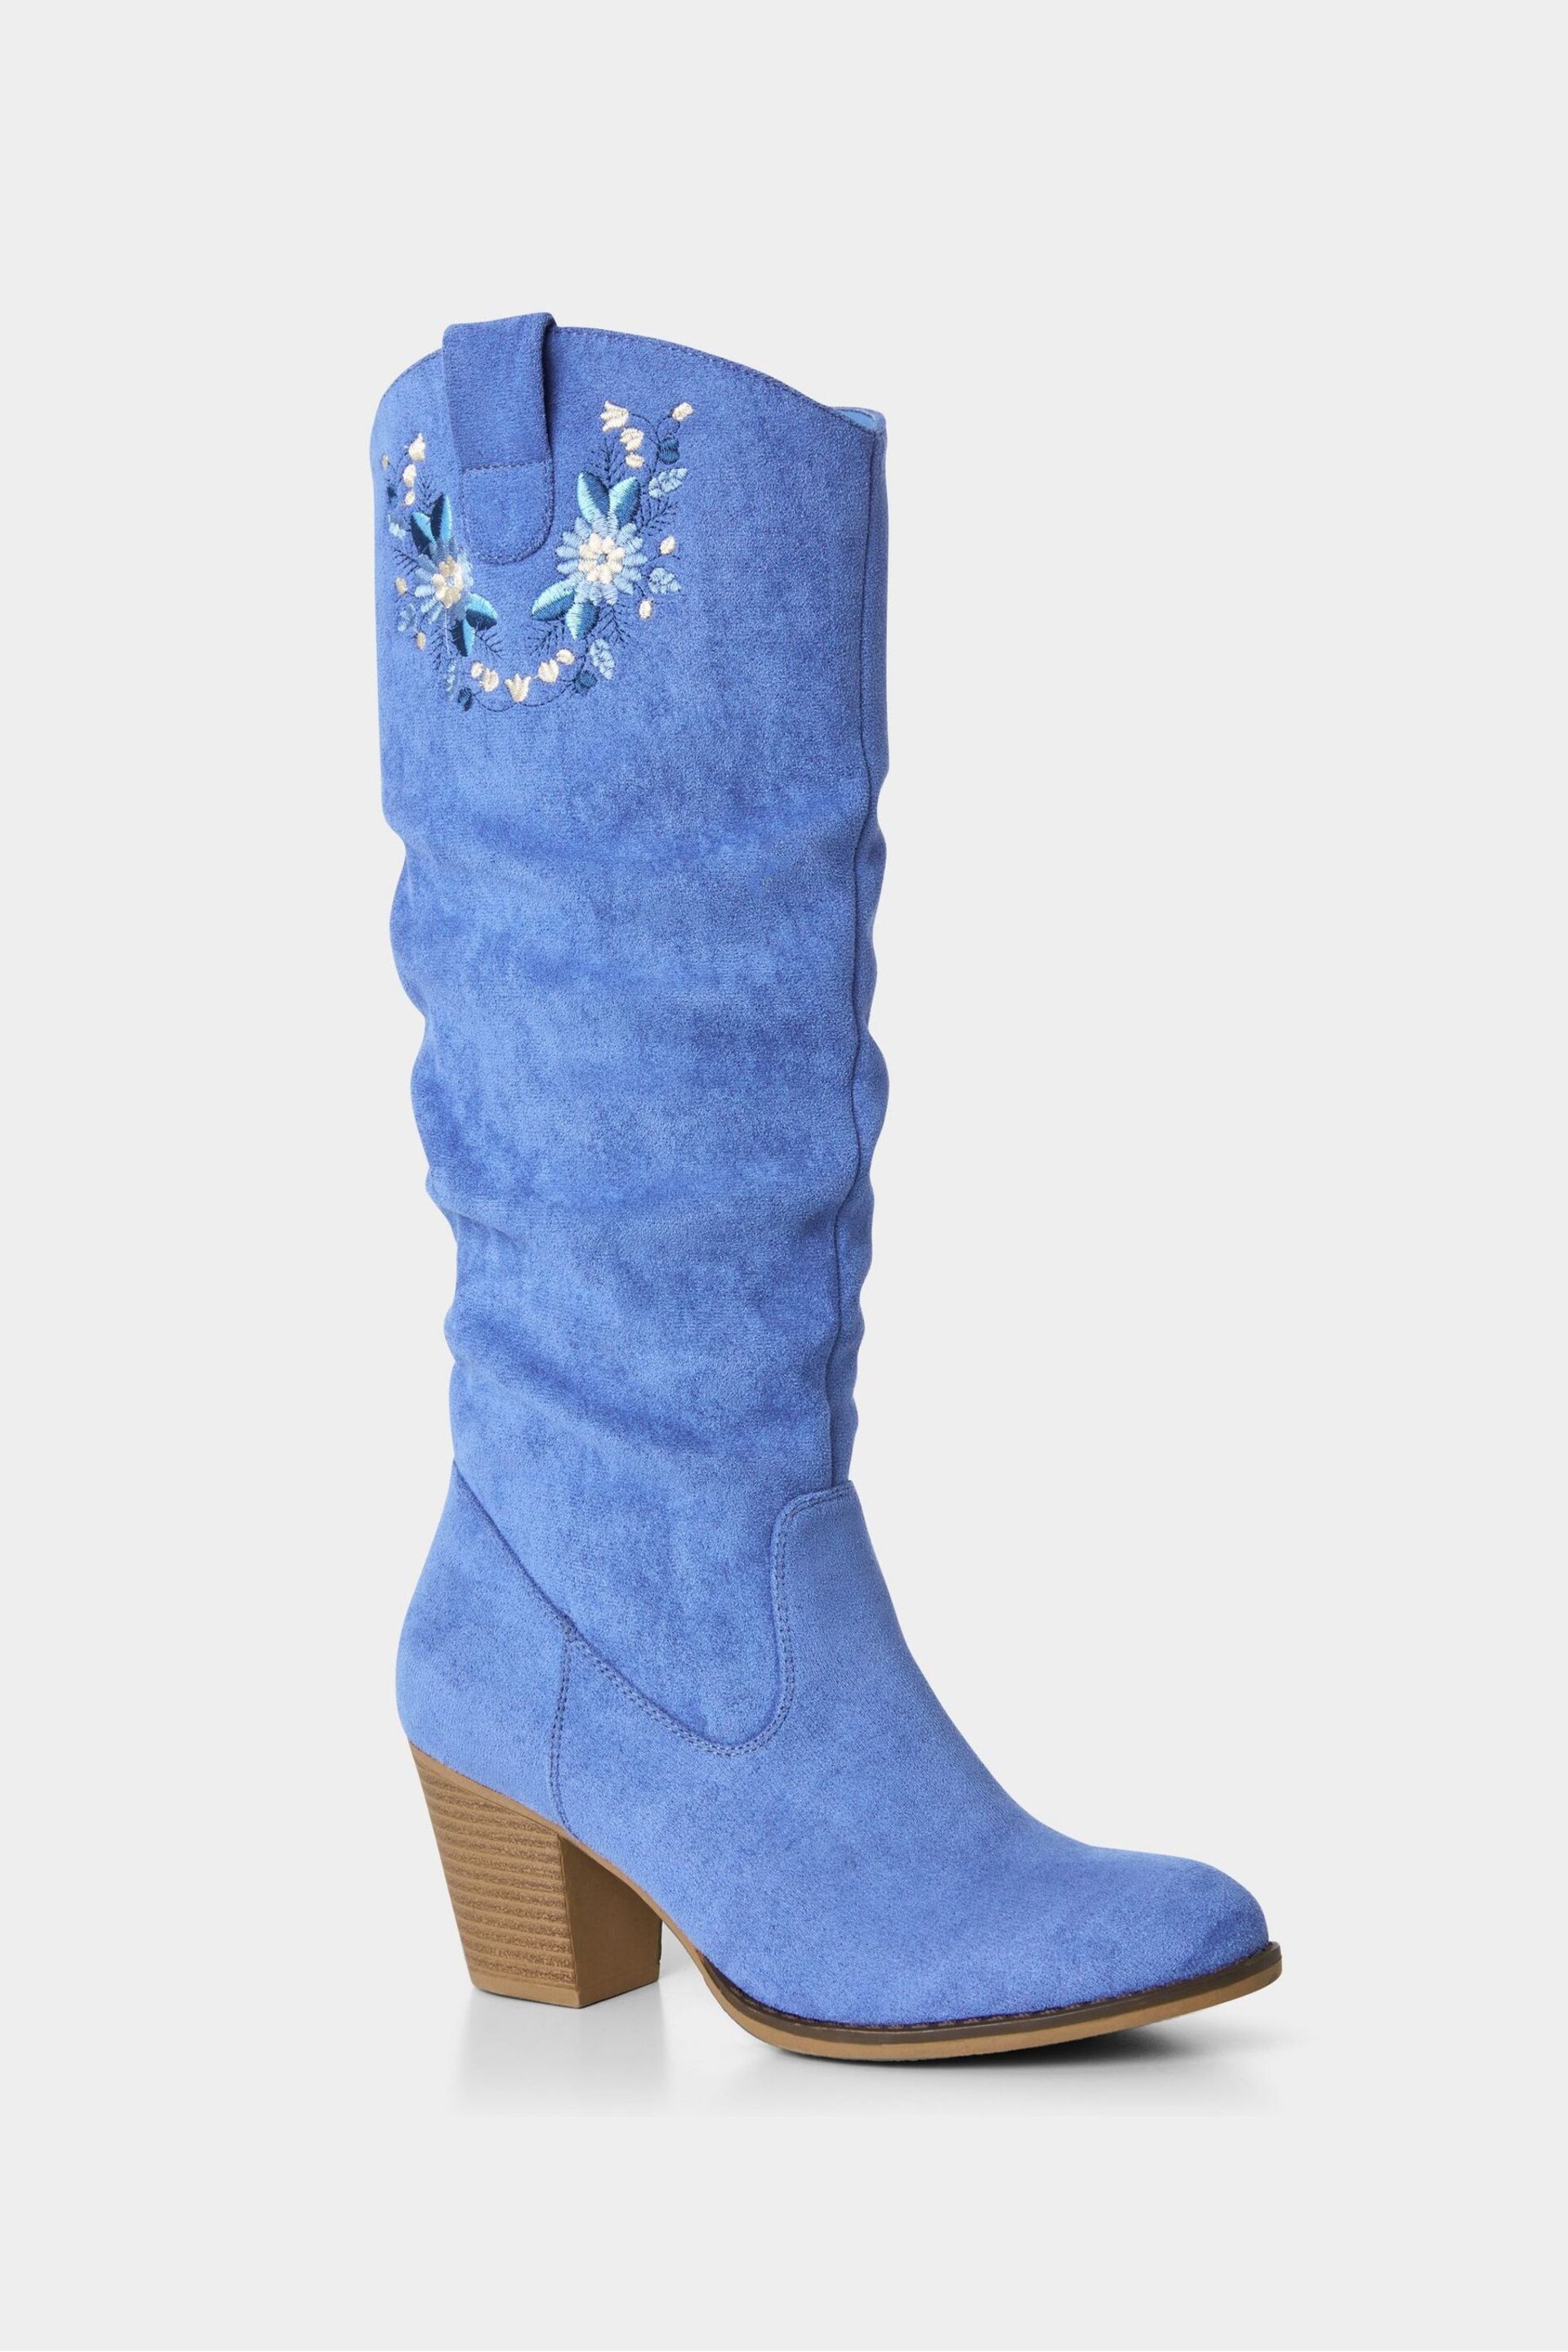 Joe Browns Blue Embroidered Knee High Boots - Image 3 of 5